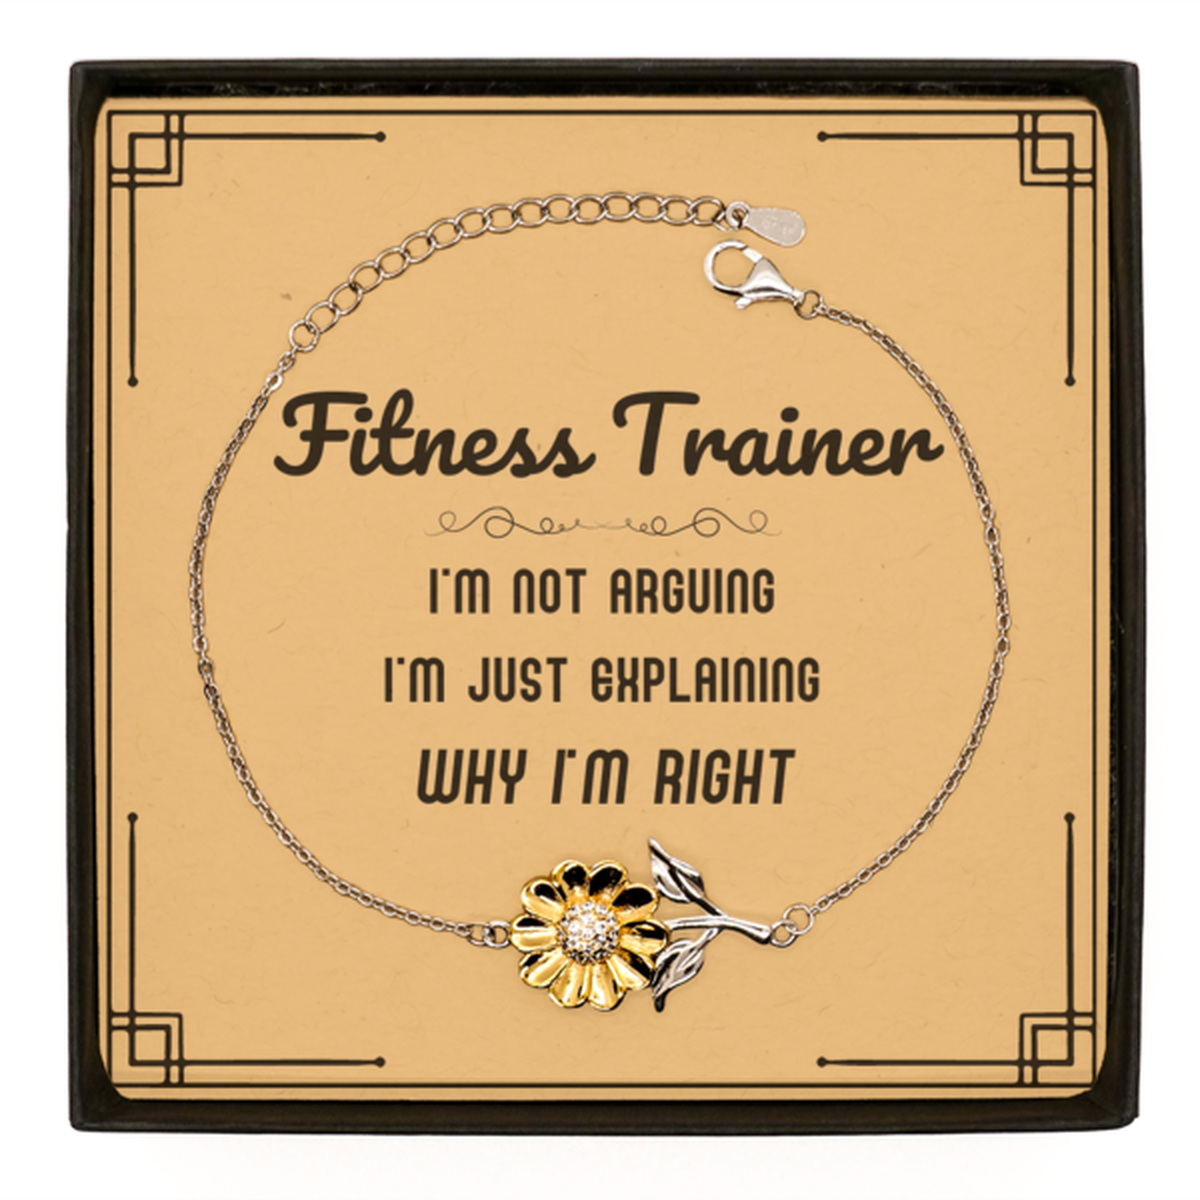 Fitness Trainer I'm not Arguing. I'm Just Explaining Why I'm RIGHT Sunflower Bracelet, Funny Saying Quote Fitness Trainer Gifts For Fitness Trainer Message Card Graduation Birthday Christmas Gifts for Men Women Coworker